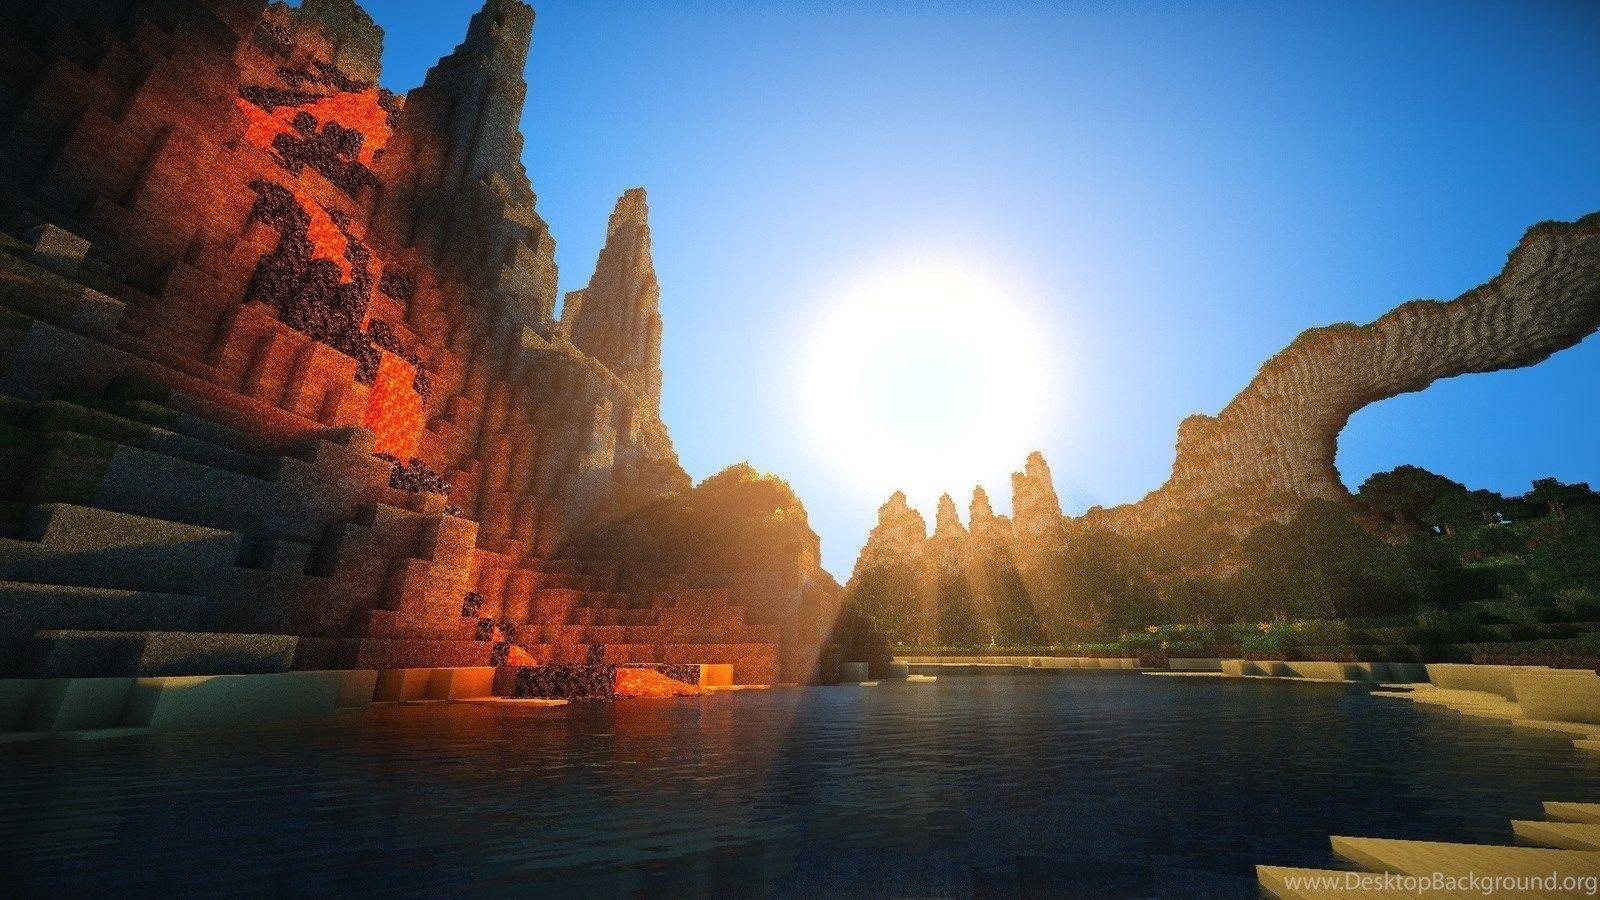 minecraft best texture pack for shaders